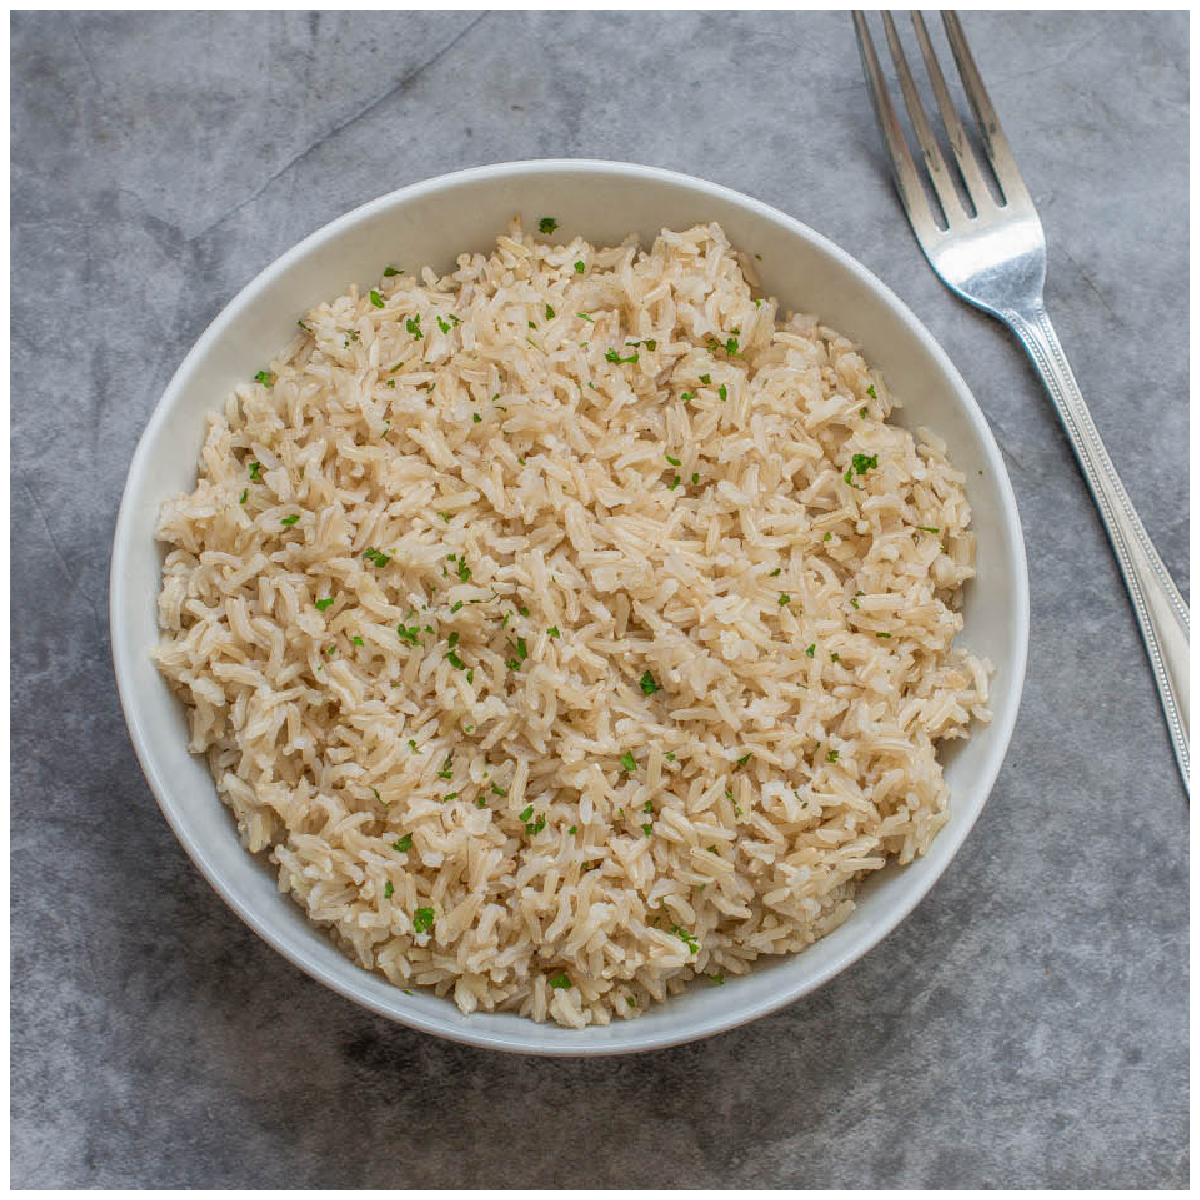 https://thatgirlcookshealthy.com/wp-content/uploads/2022/02/How-to-cook-brown-rice-image.png